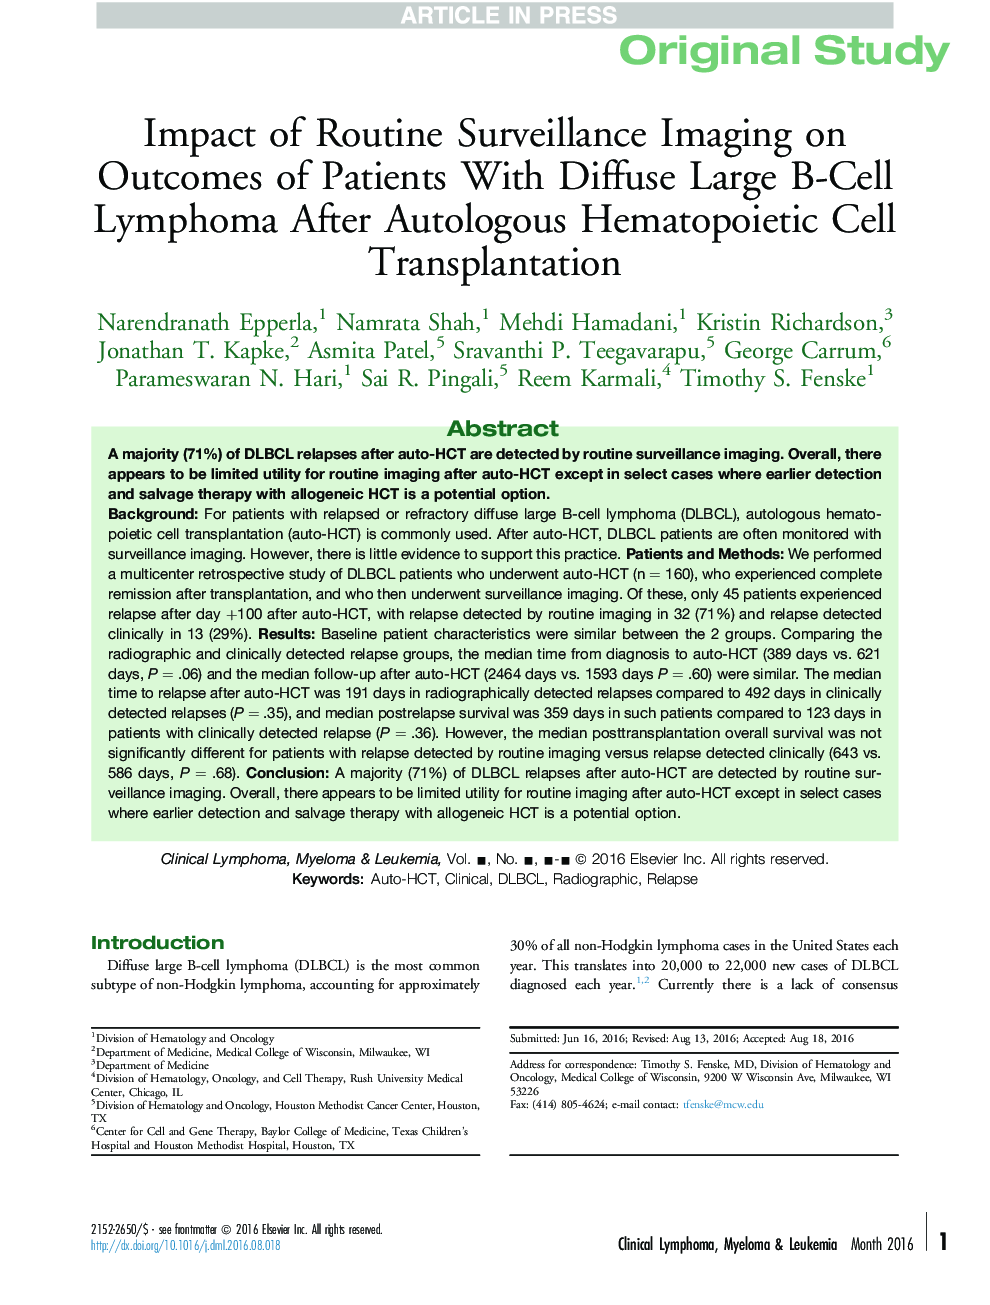 Impact of Routine Surveillance Imaging on Outcomes of Patients With Diffuse Large B-Cell Lymphoma After Autologous Hematopoietic Cell Transplantation